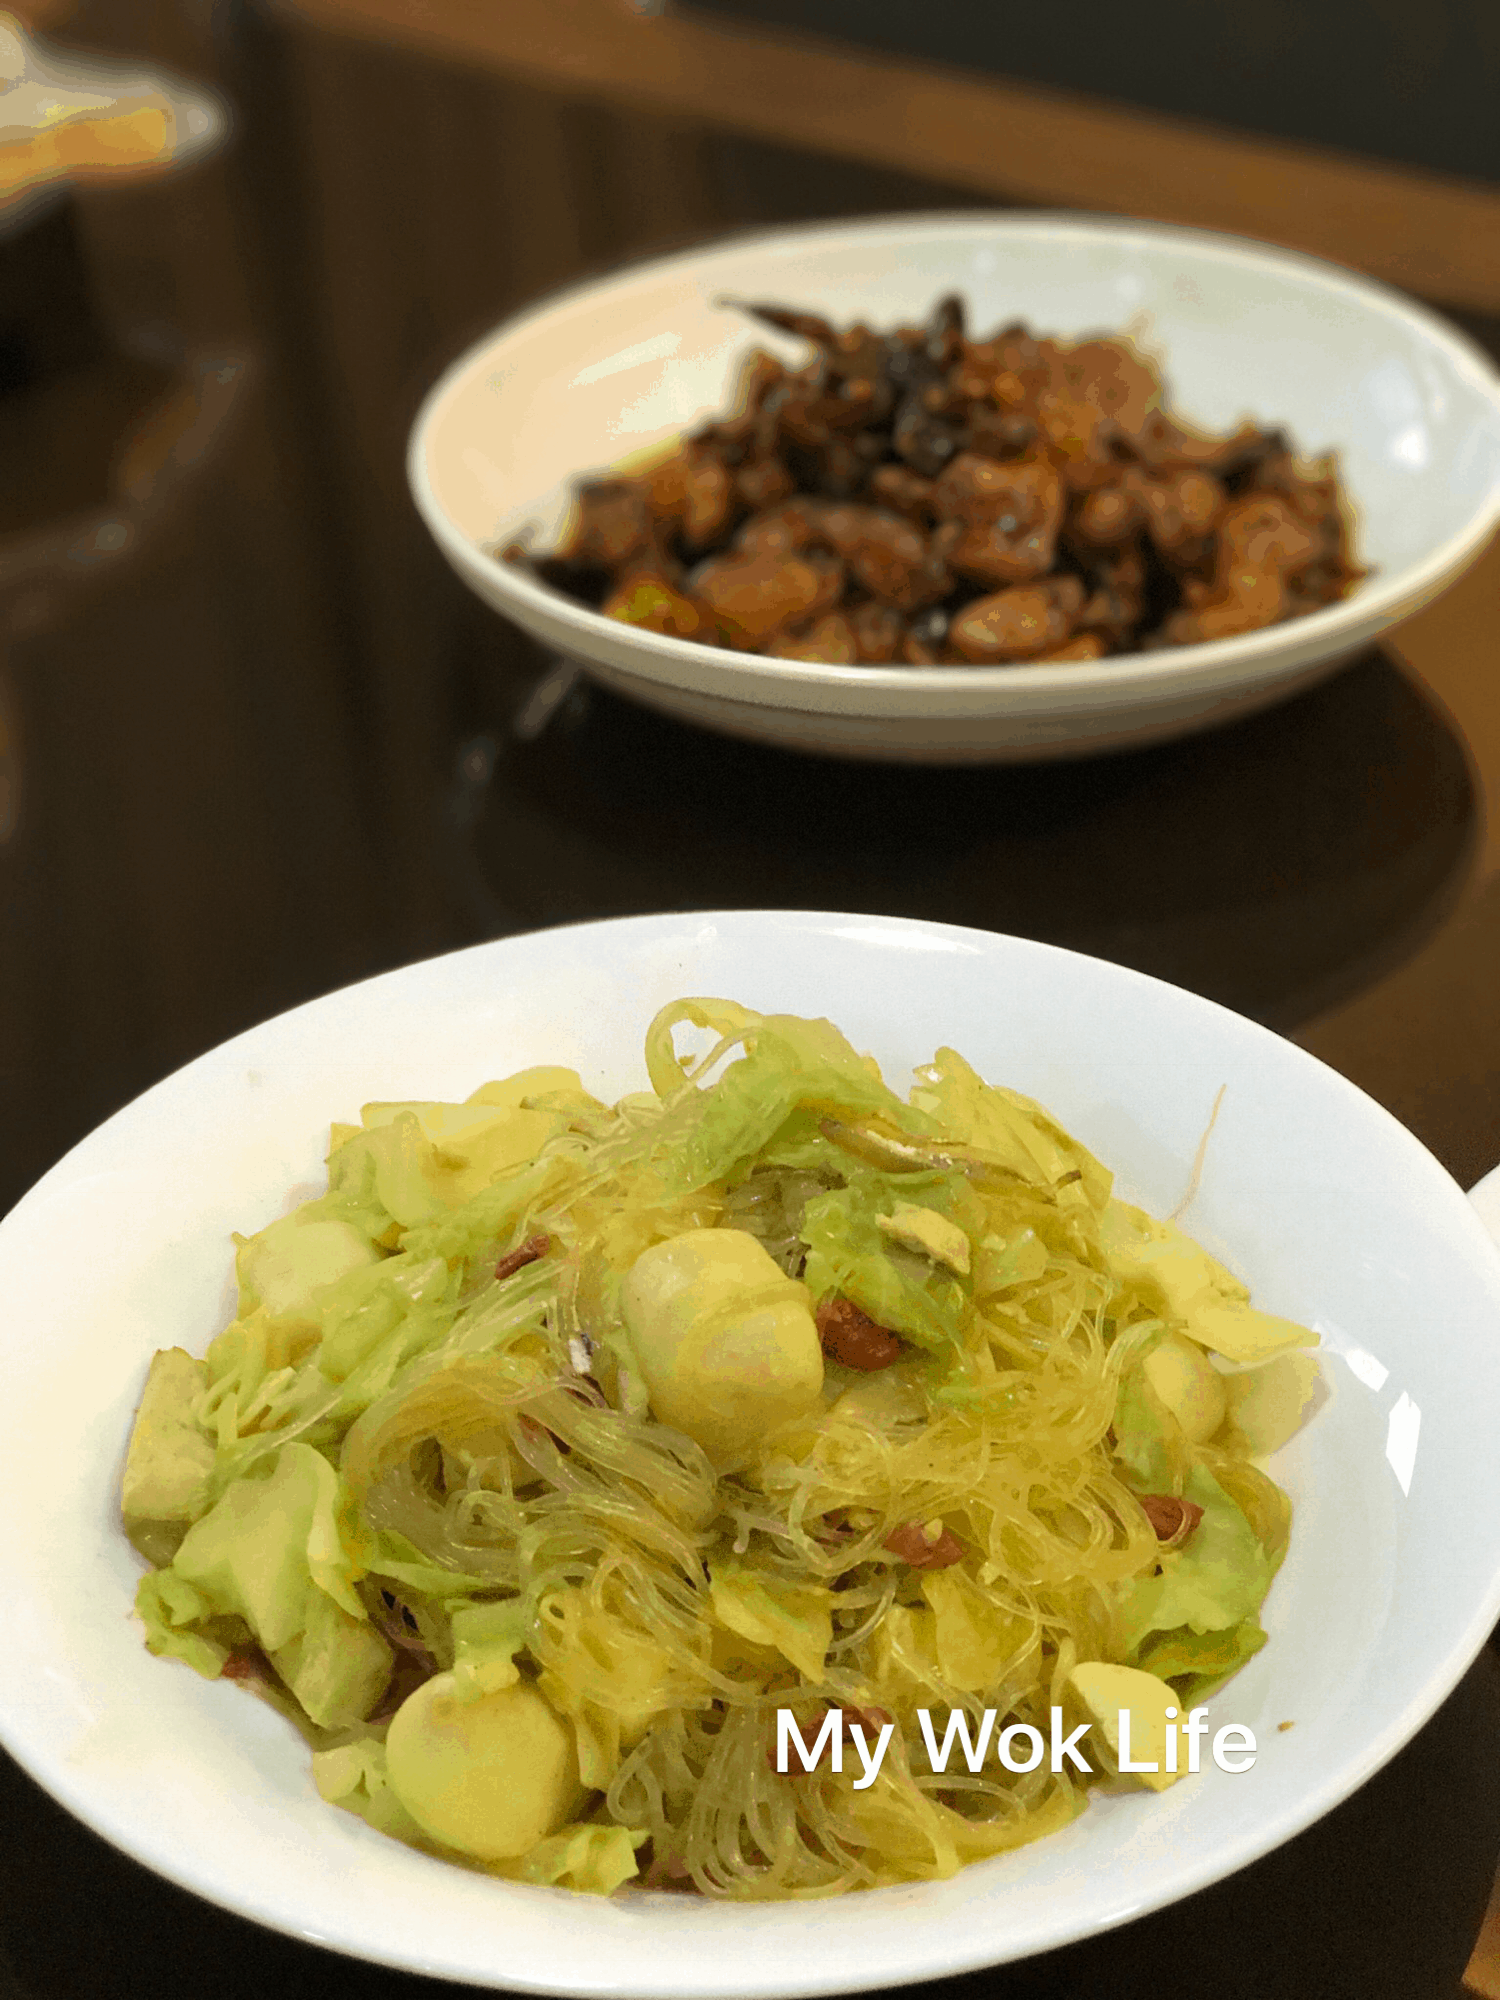 My Wok Life Cooking Blog - Stir Fried Cabbage & Tang Hoon (Glass Noodle) For Weight Loss -